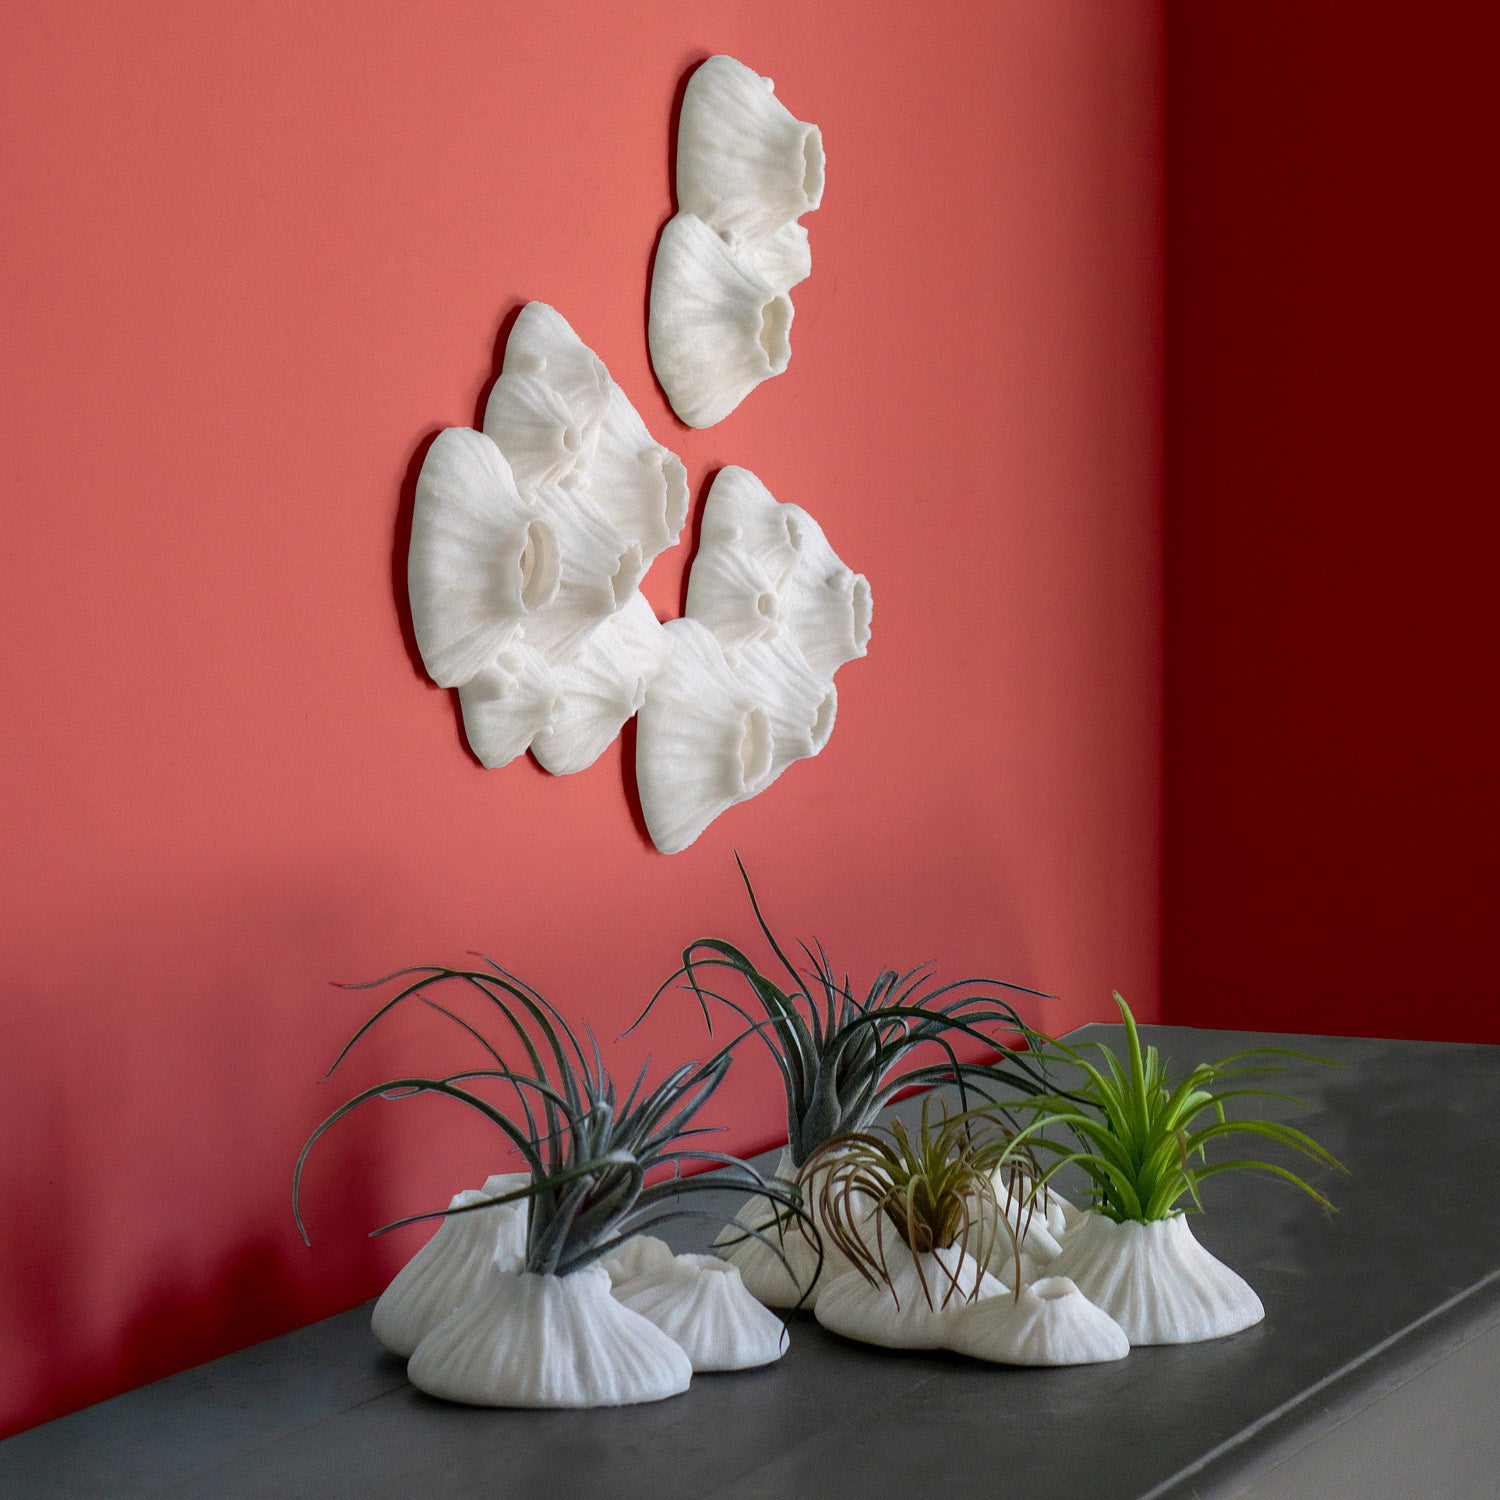 White barnacle sculptures hanging on a red wall with same style sculptures used as vases on table.